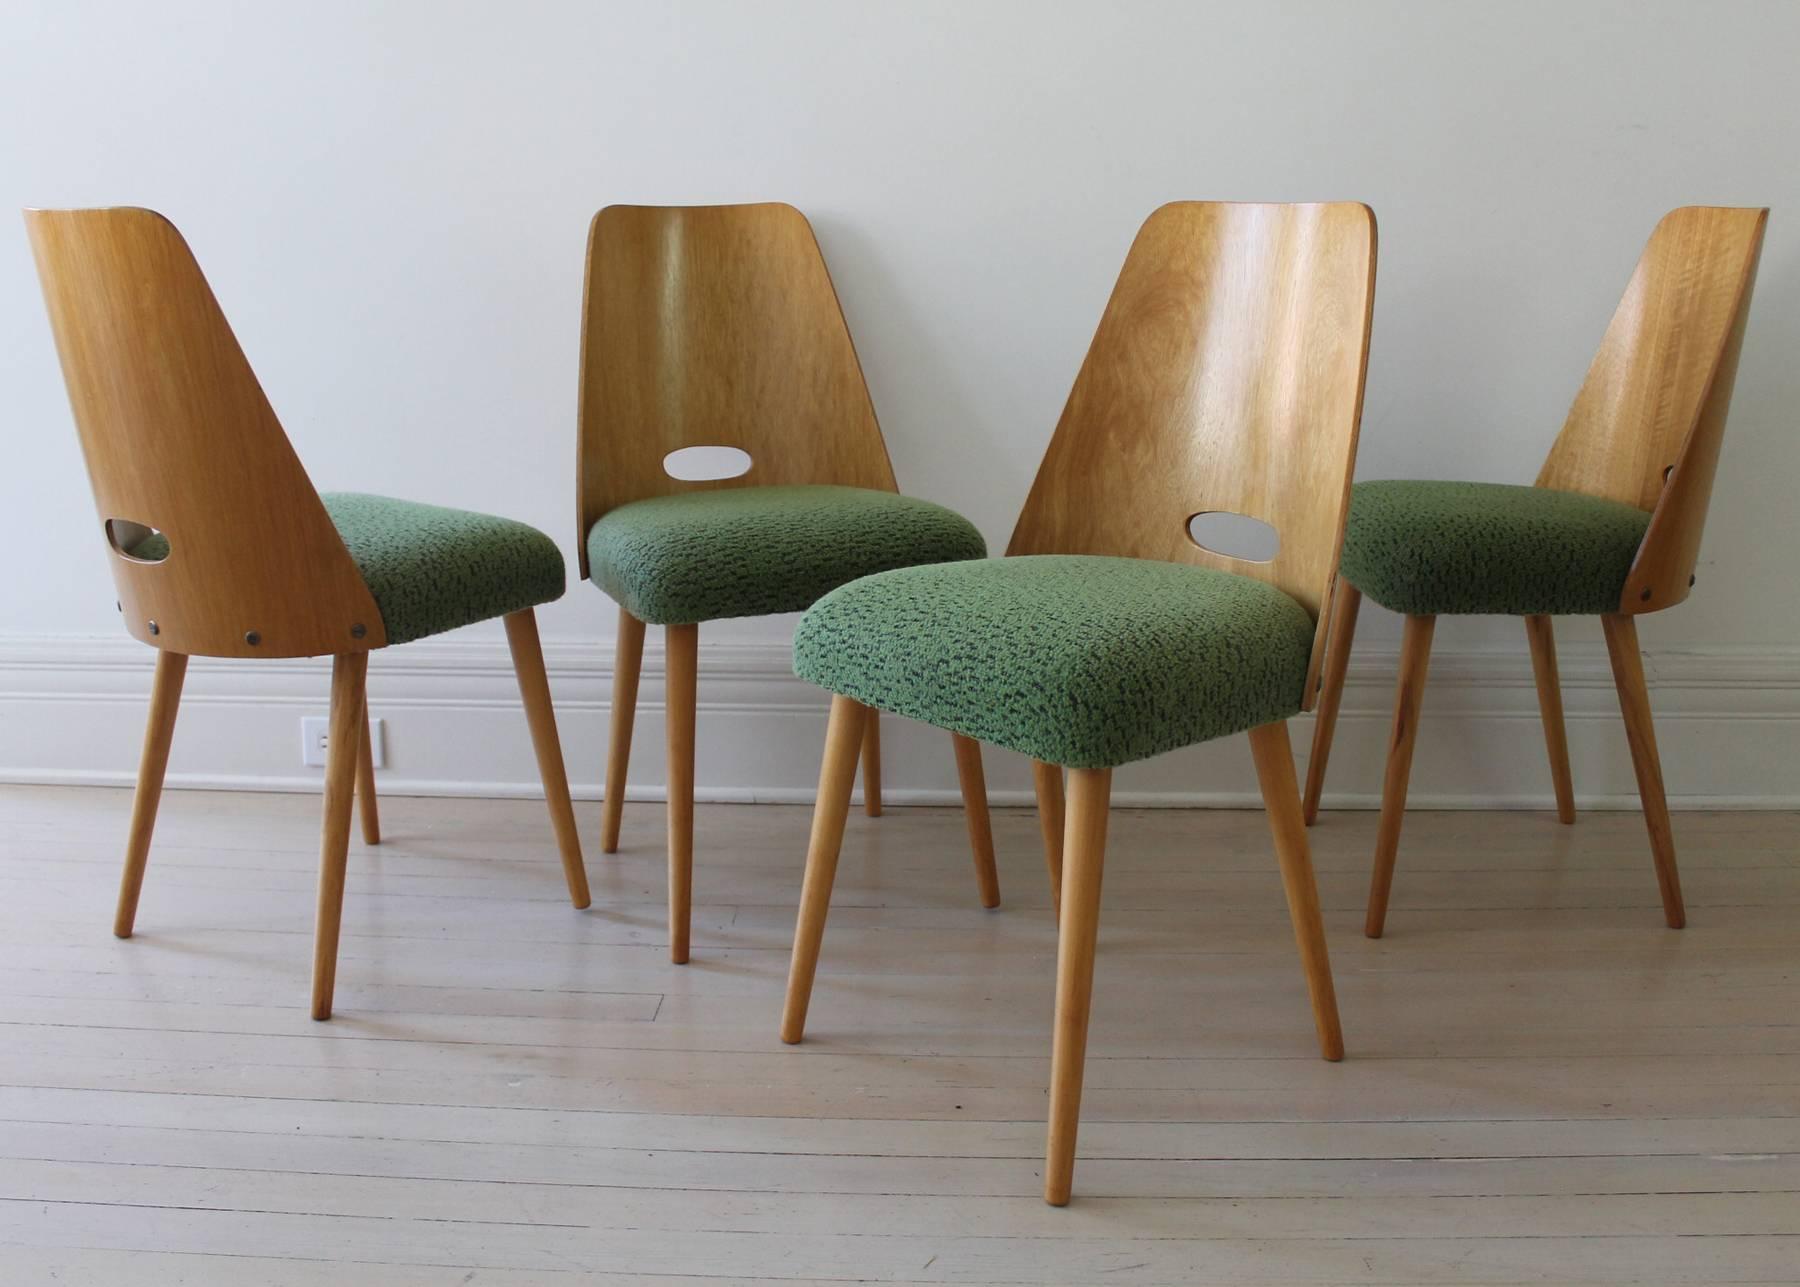 A set of four dining chairs from 1960s produced by TON in Czech Republic.
Made from linden wood, restored and upholstered with original fabric from the period.